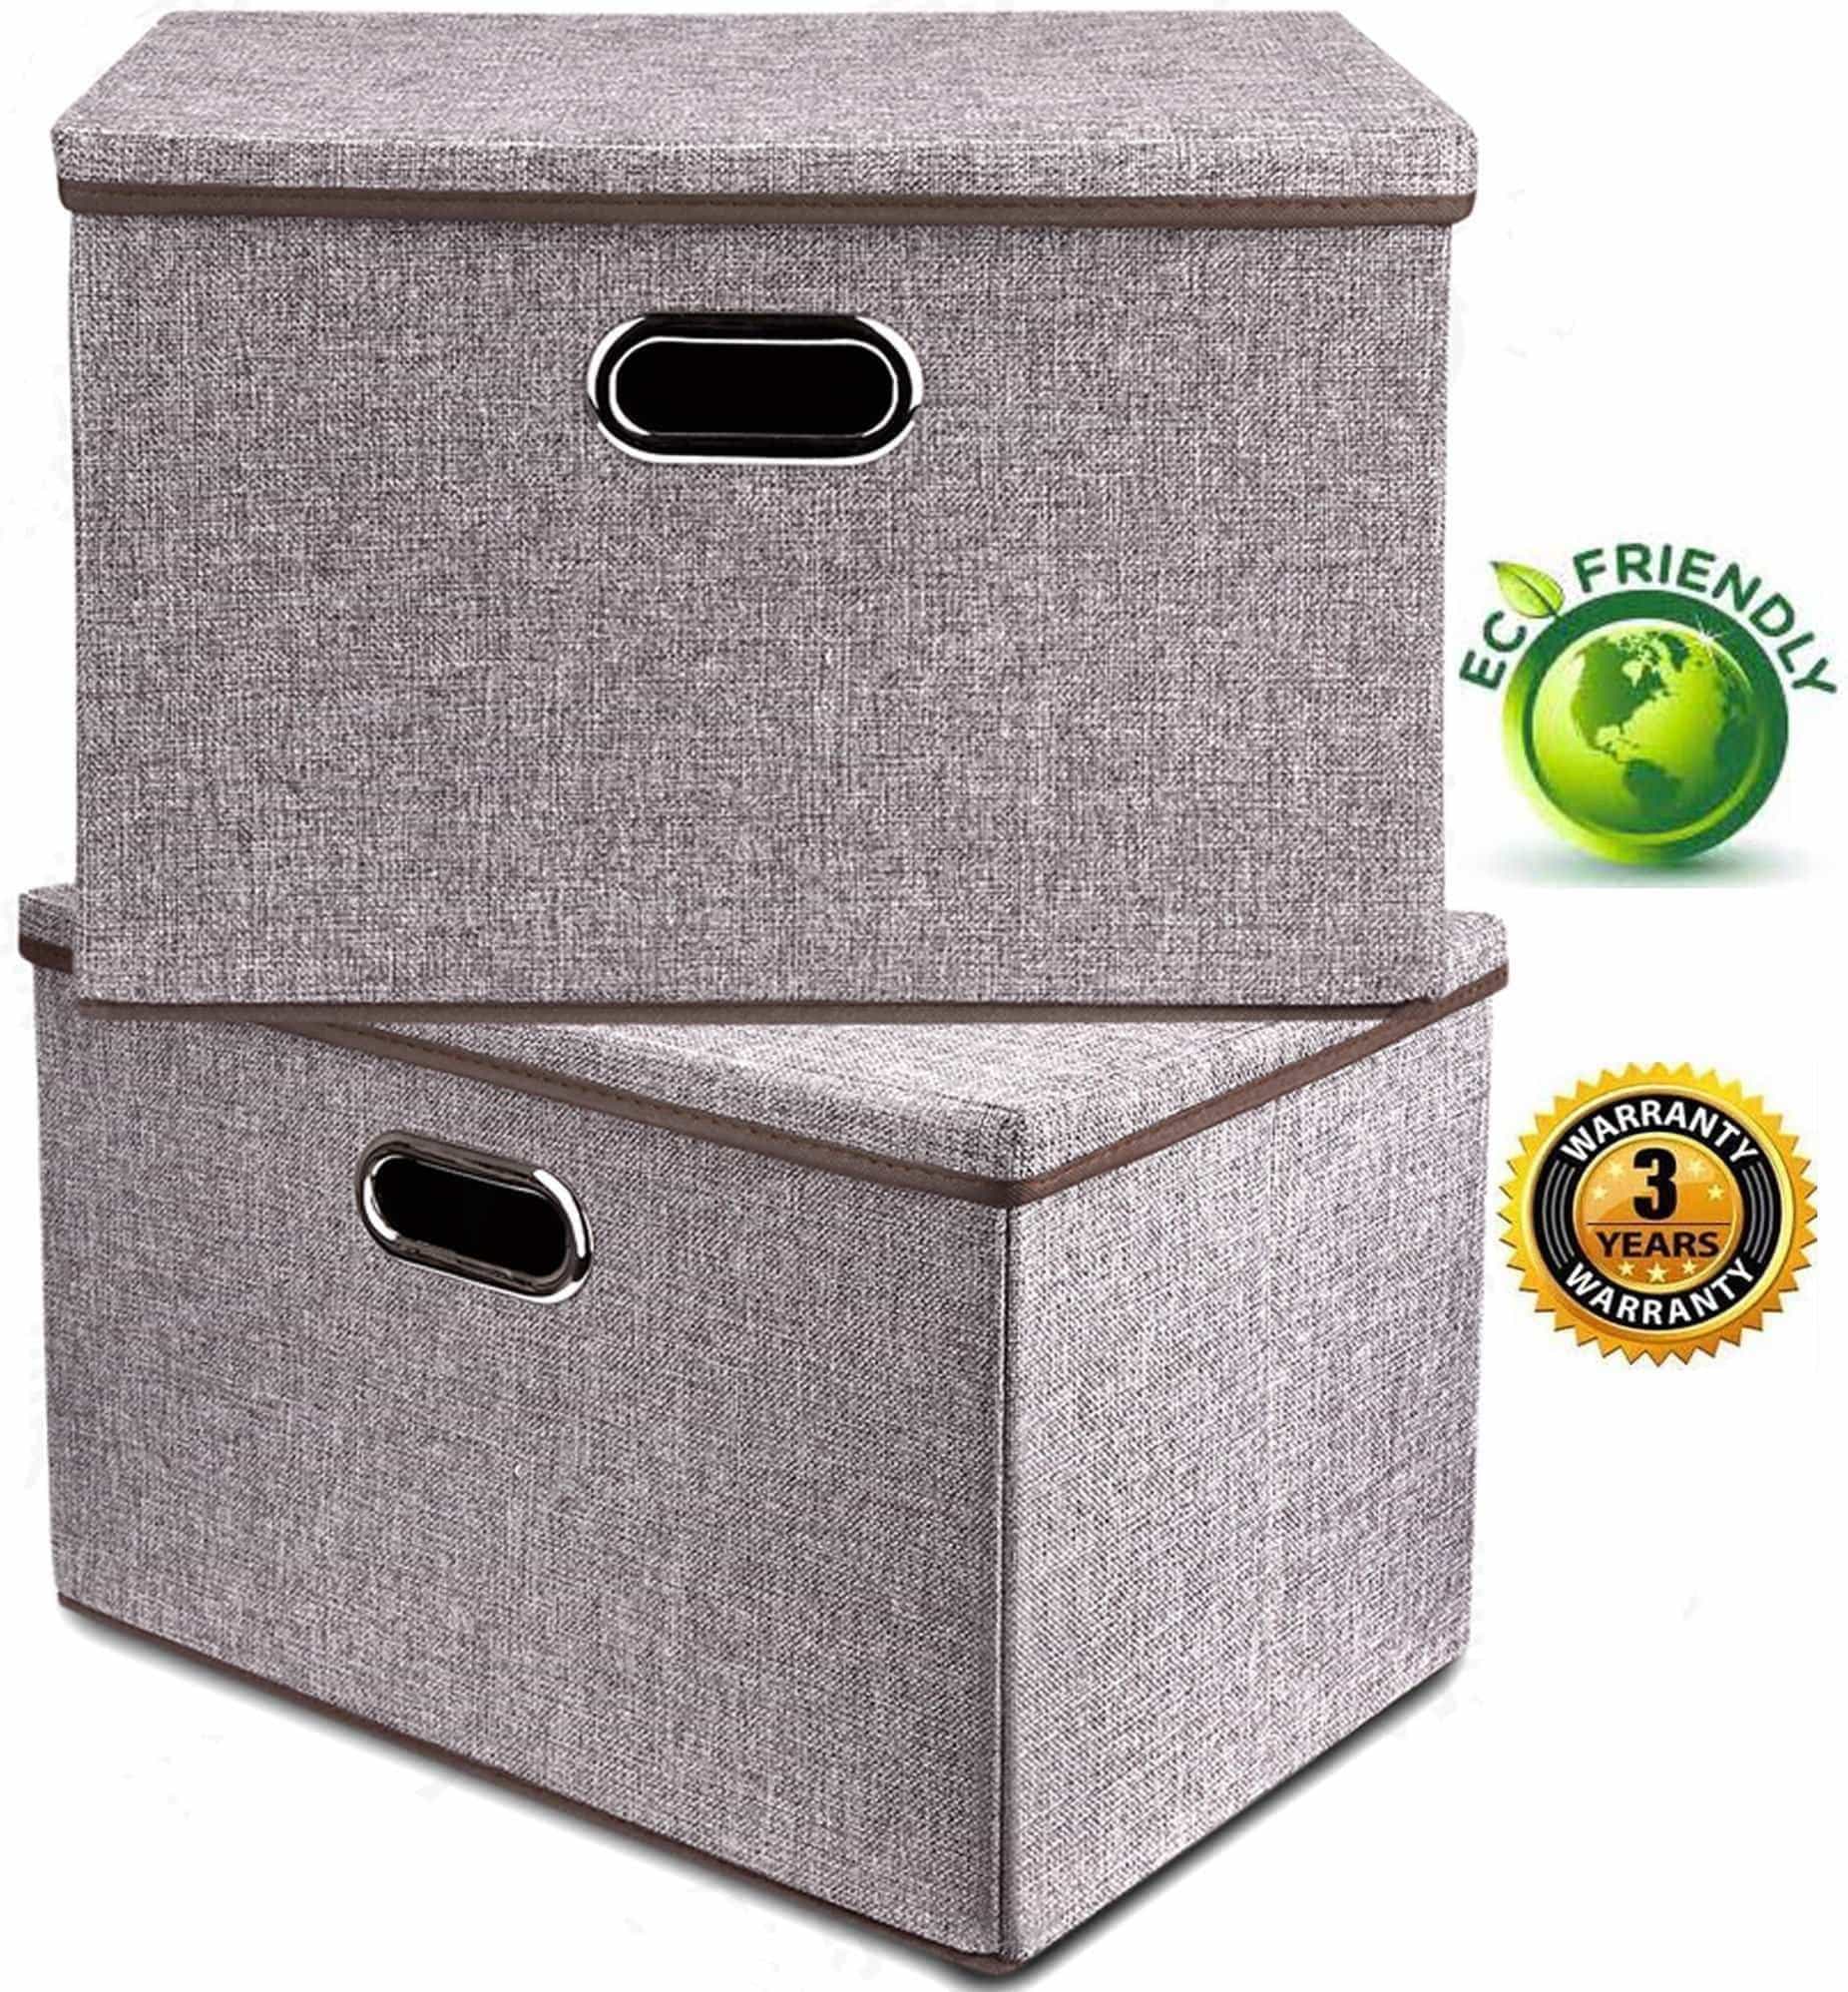 Explore large linen fabric foldable storage container 2 pack with removable lid and handles storage bin box cubes organizer gray for home office nursery closet bedroom living room